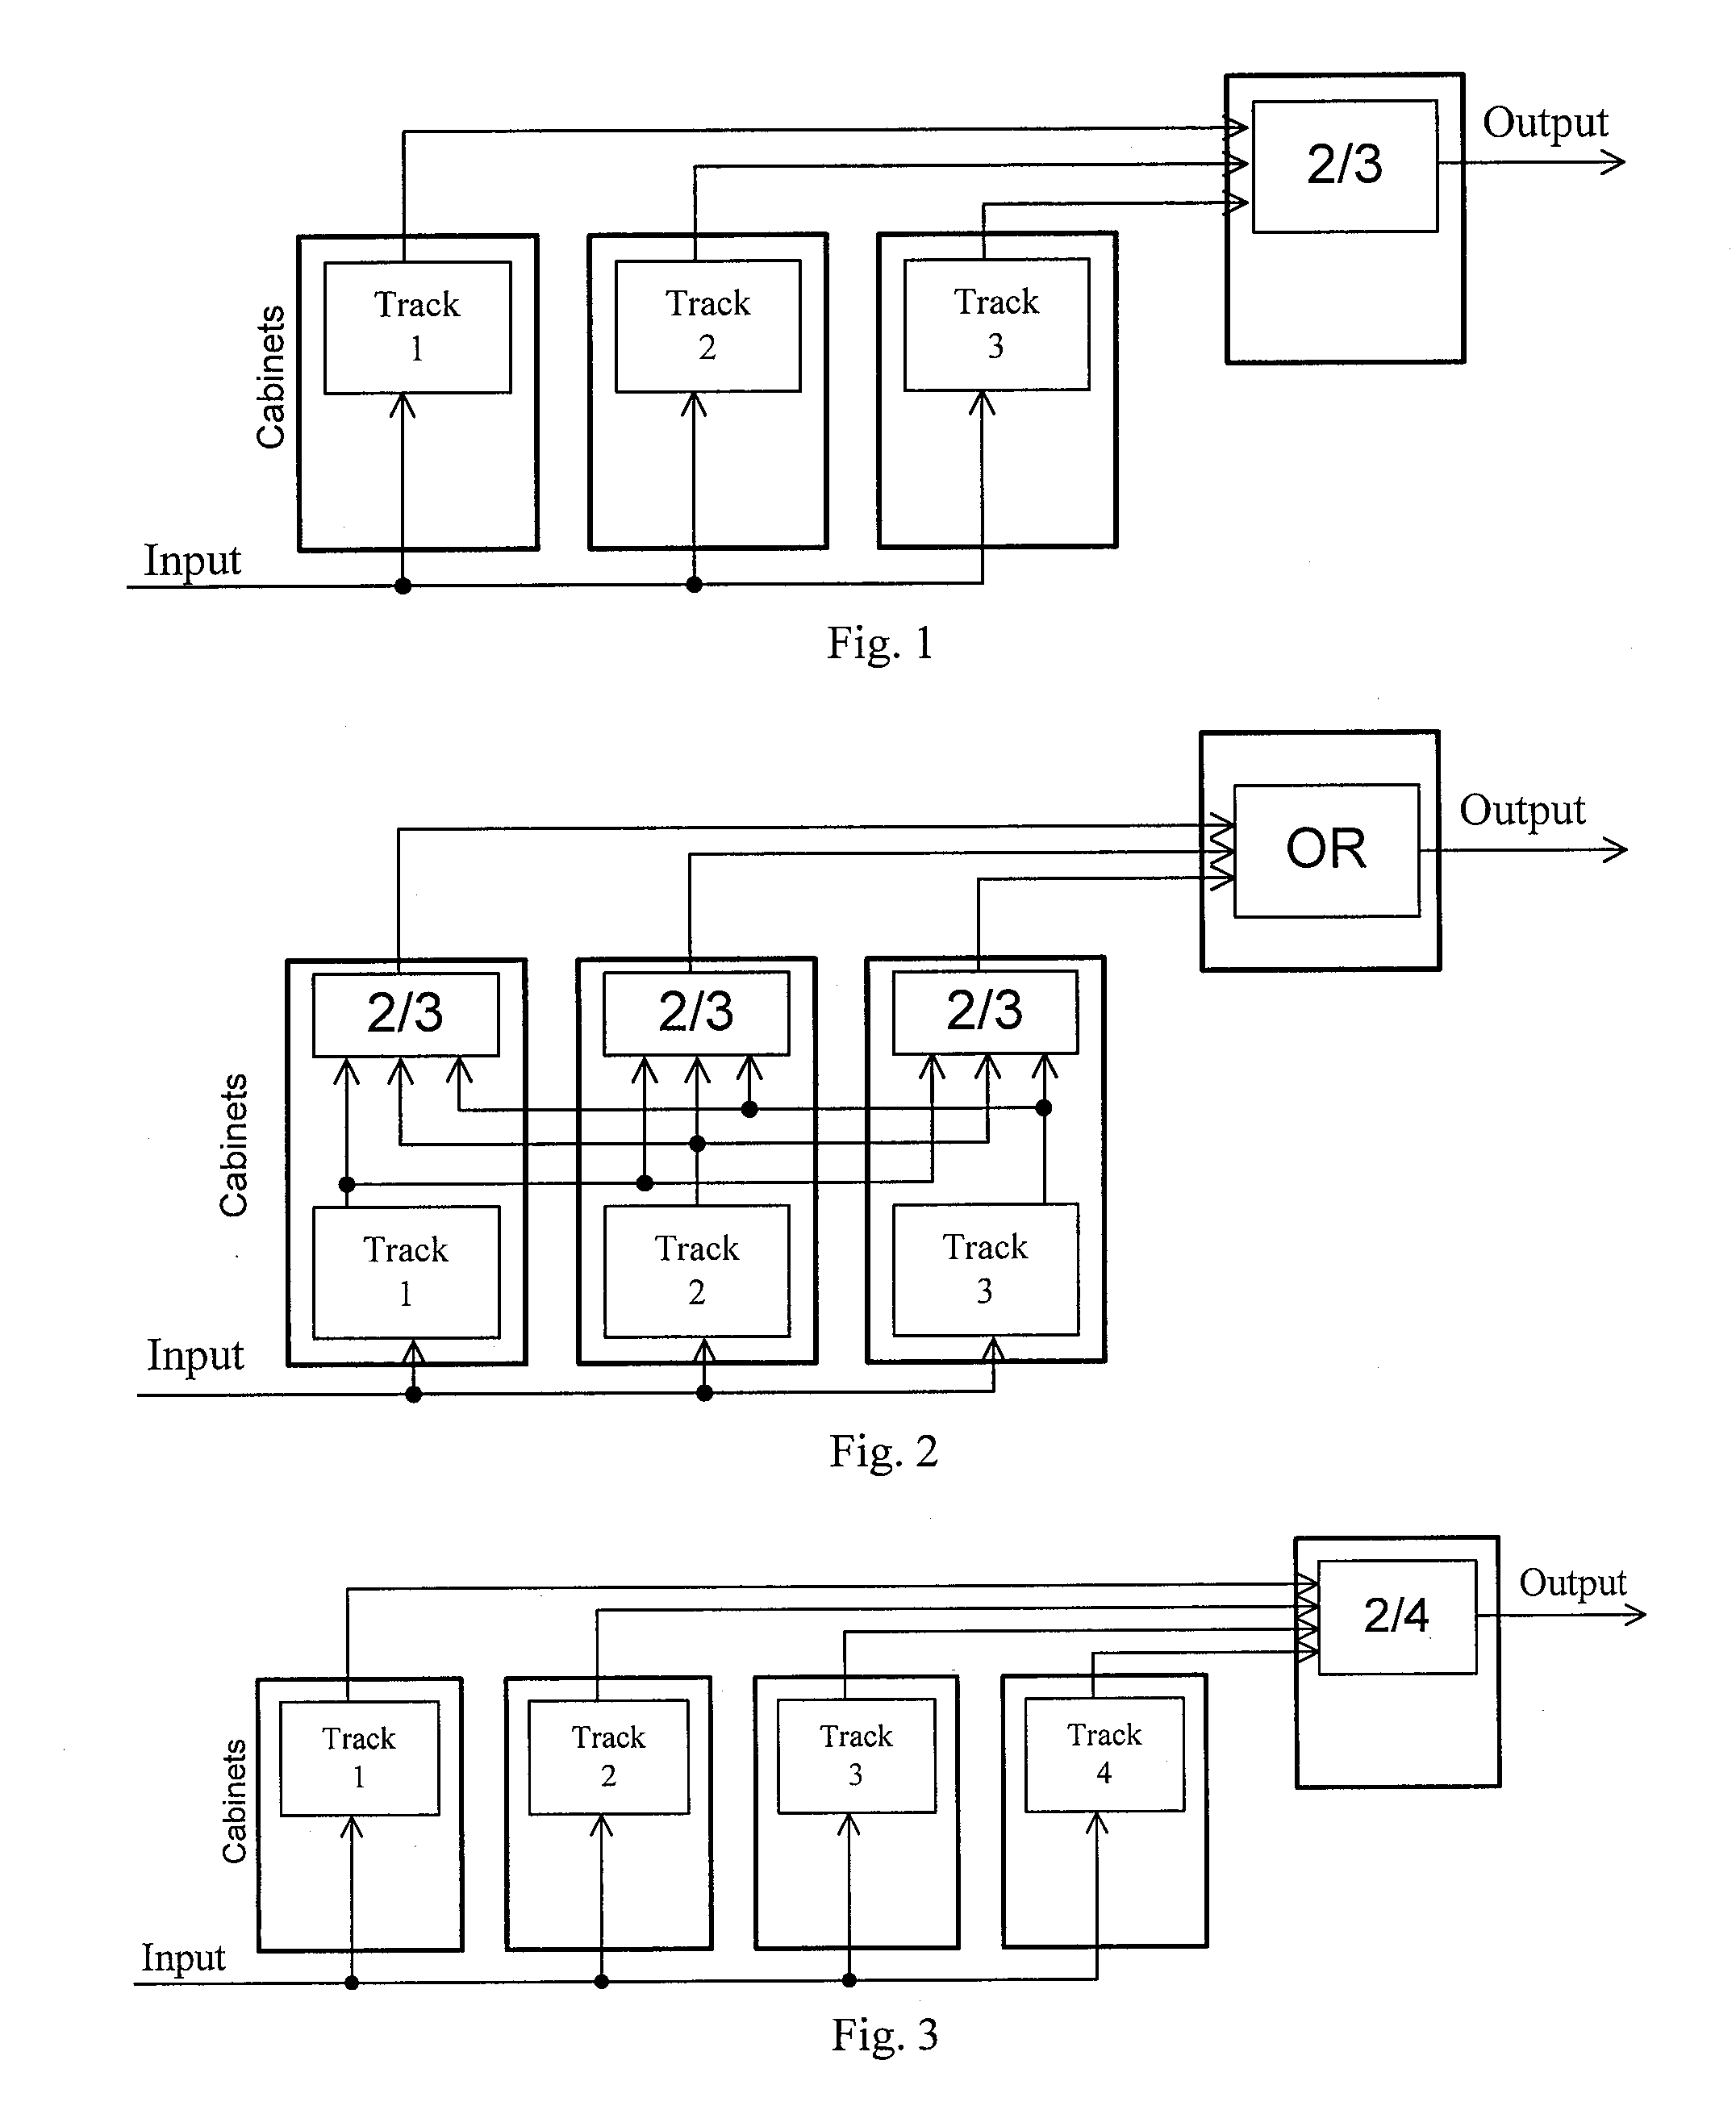 Method and platform to implement safety critical systems